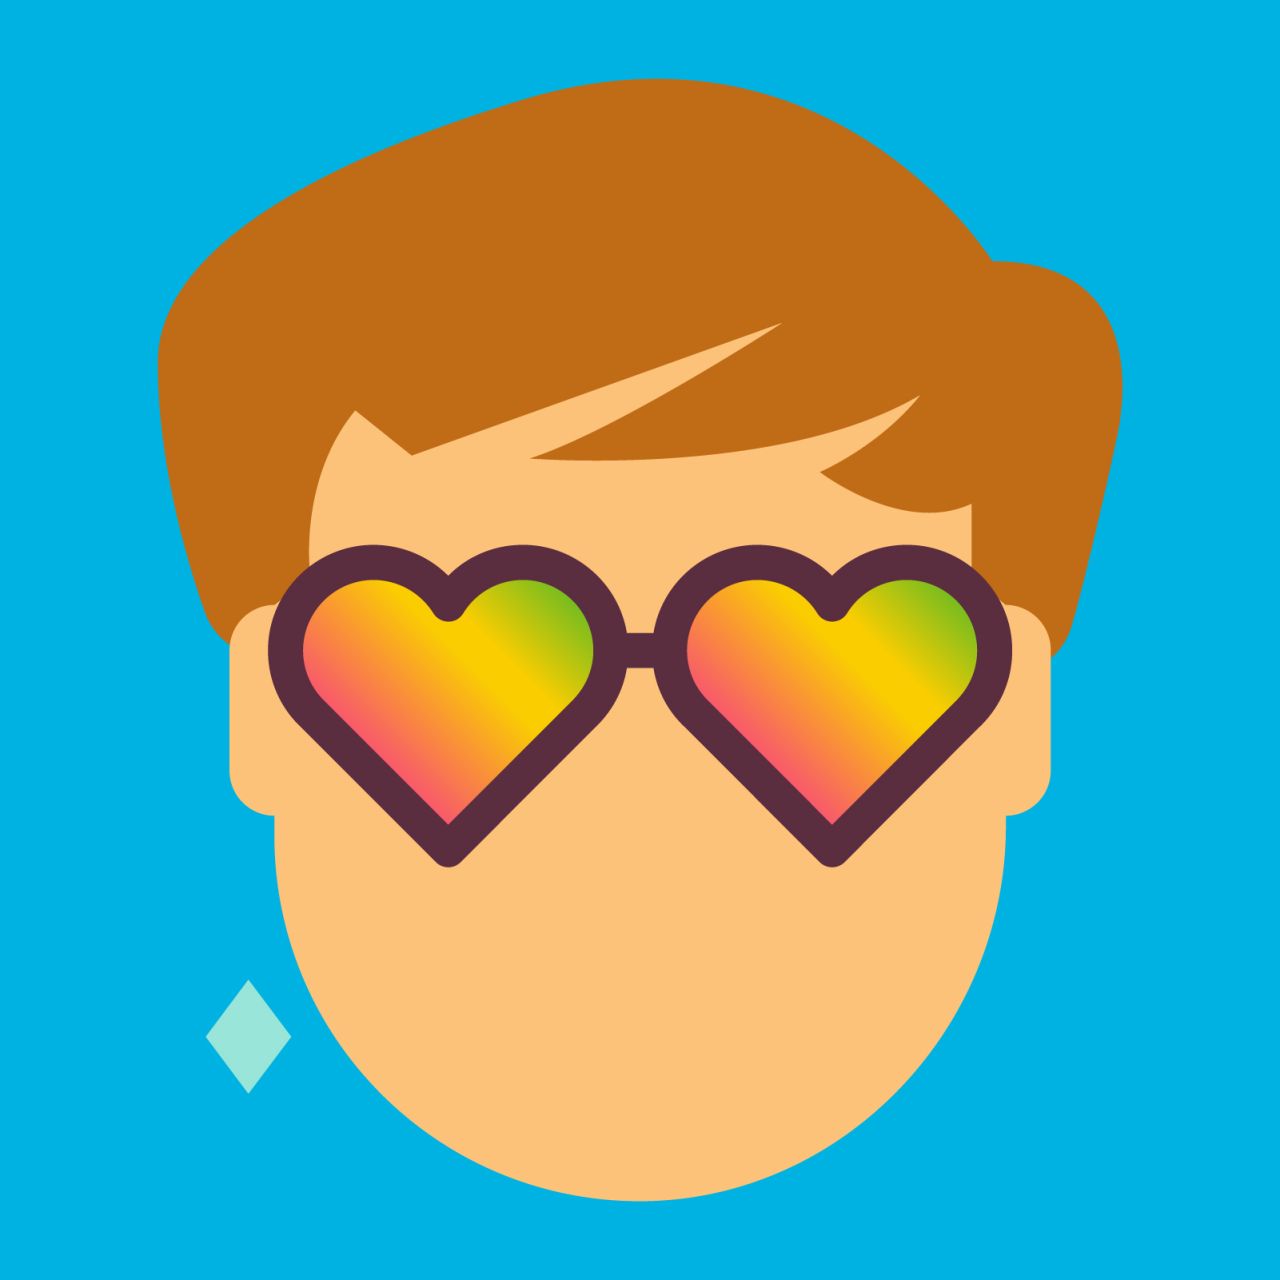 This illustration by Ben the Illustrator is being used as the new Elton John emoji. Courtesy of Ben the Illustrator/Pan Macmillan